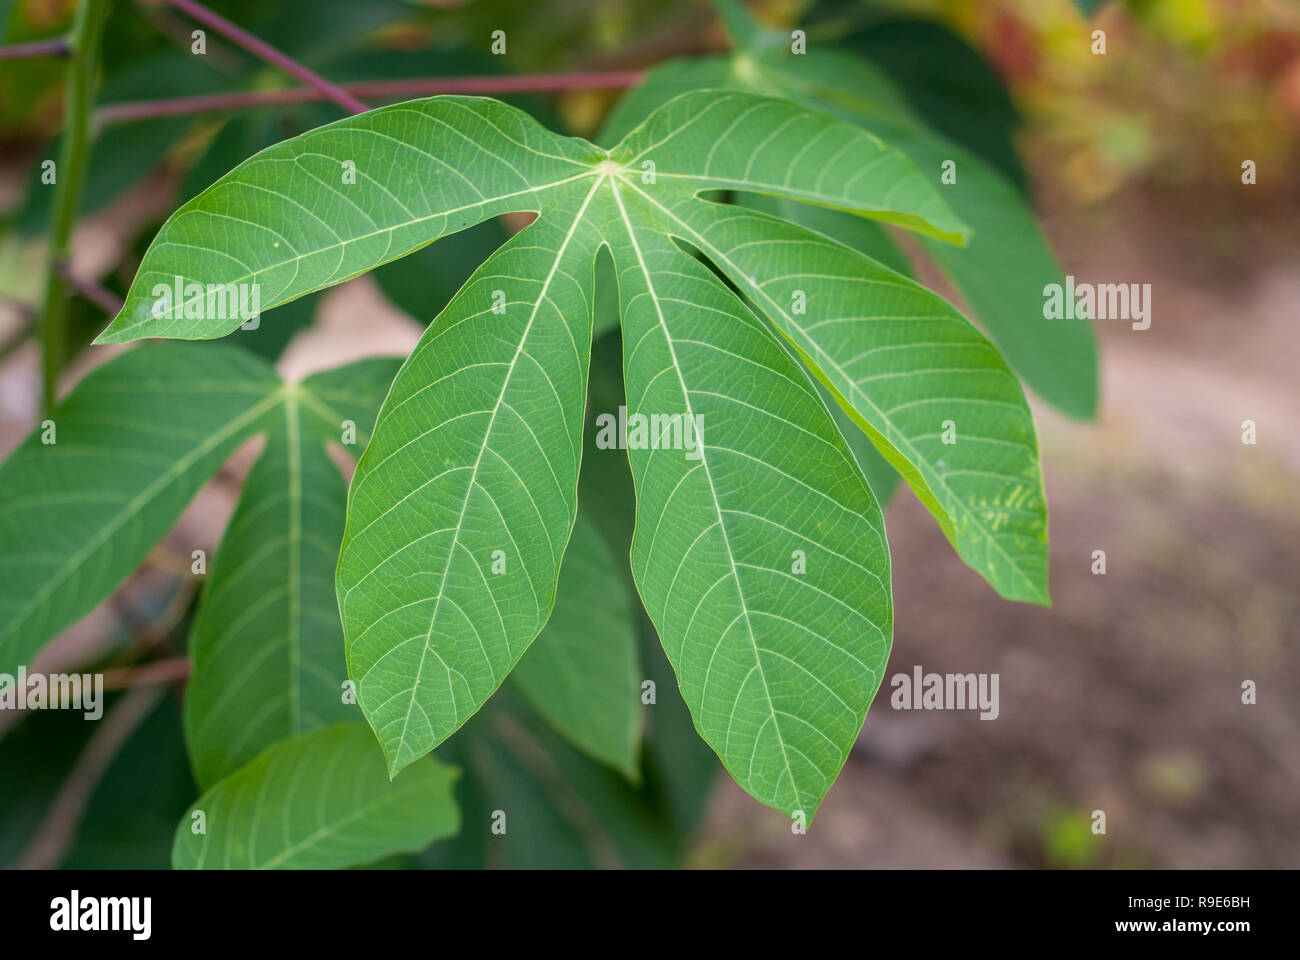 General form of cassava leaves Stock Photo